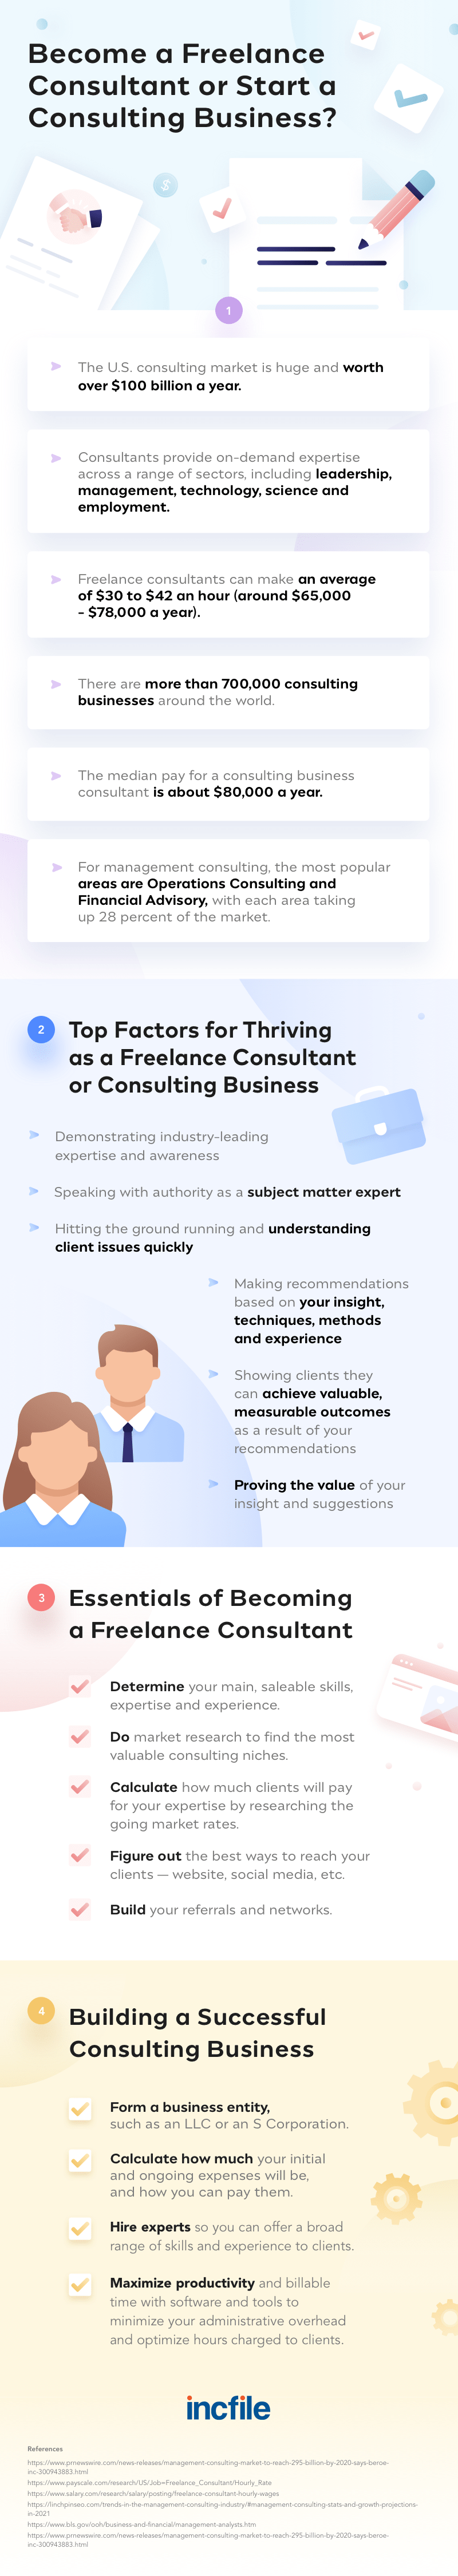 freelance-consultant-vs-consulting-business-infographic-plaza